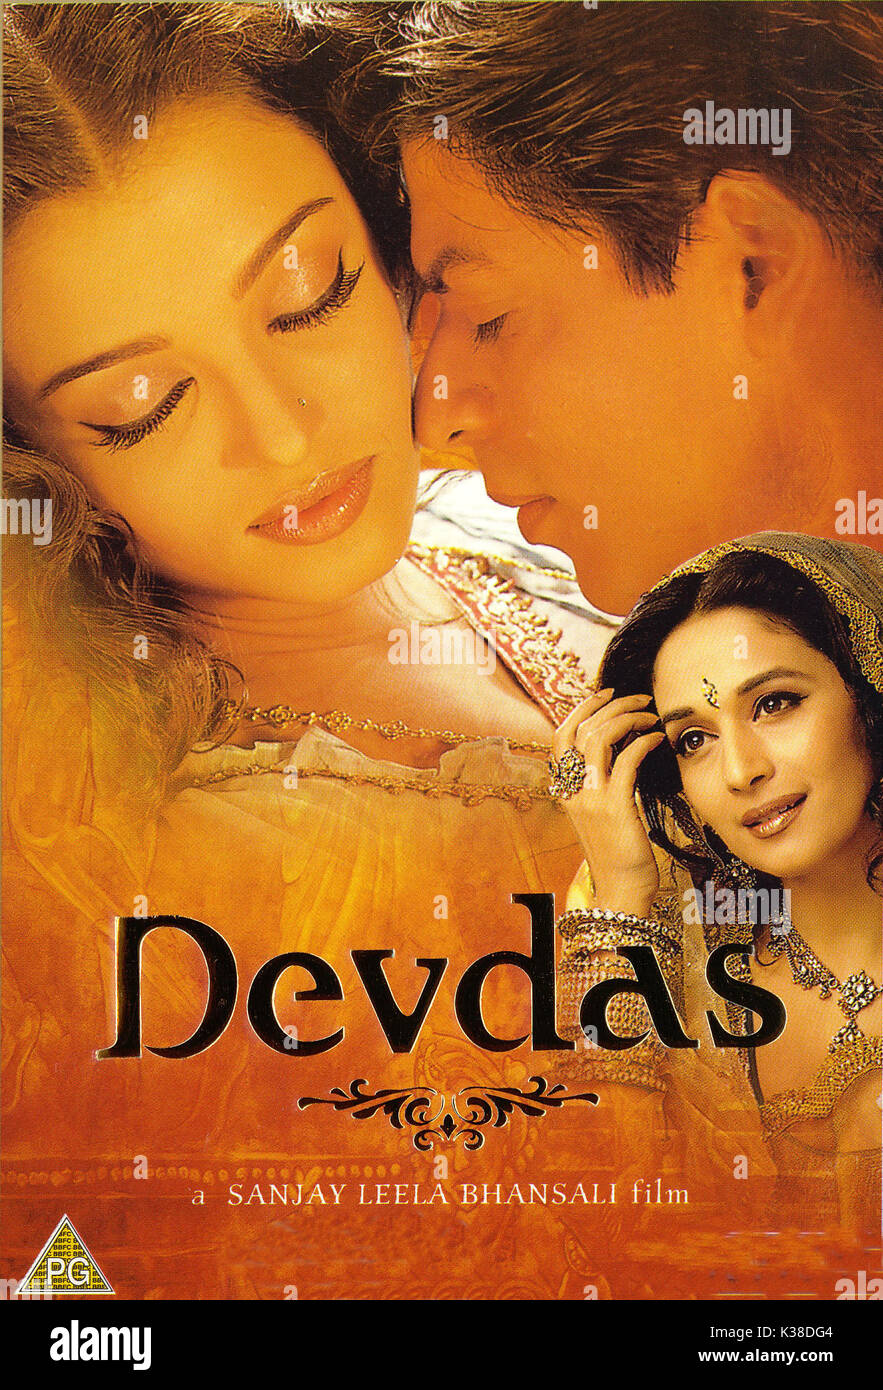 DEVDAS DIRECTOR: SANJAY LEELA BHANSALI SUBJECT: BOLLYWOOD, INDIAN FILM POSTER FROM THE RONALD GRANT ARCHIVE     Date: 2002 Stock Photo